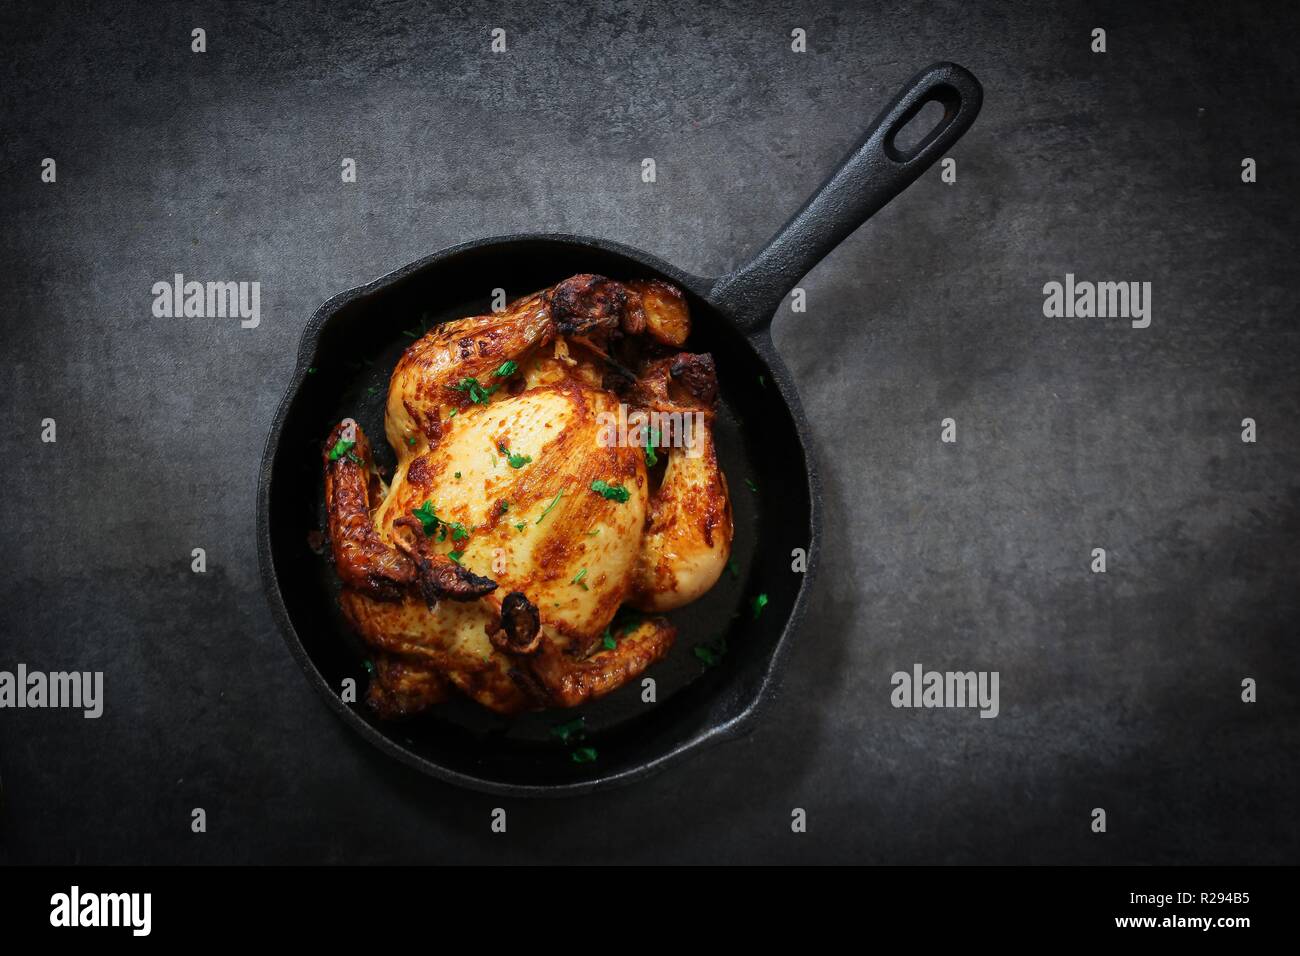 Herb masala roasted Cornish Hen / Whole mini Chicken Thanksgiving Xmas meal overhead view on dark background Stock Photo